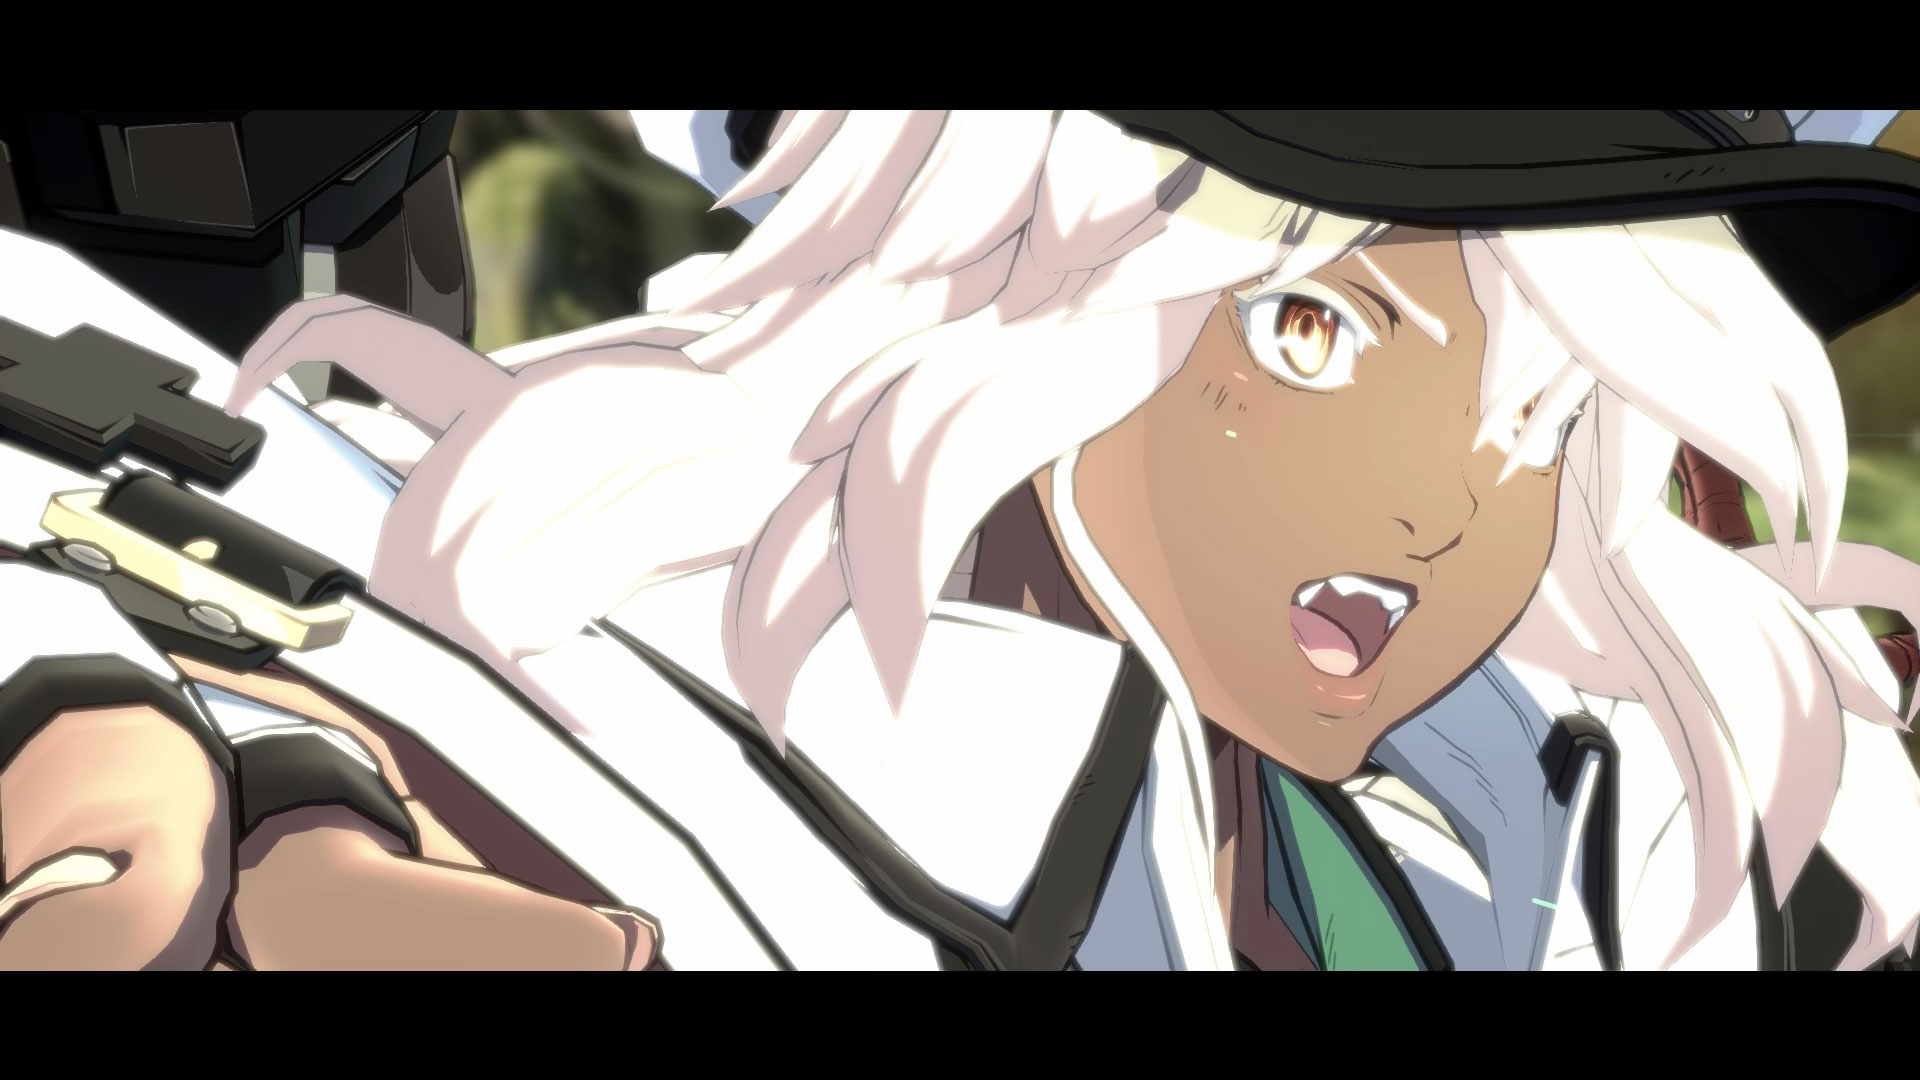 Latest Guilty Gear Strive Trailer featuring Ramlethal